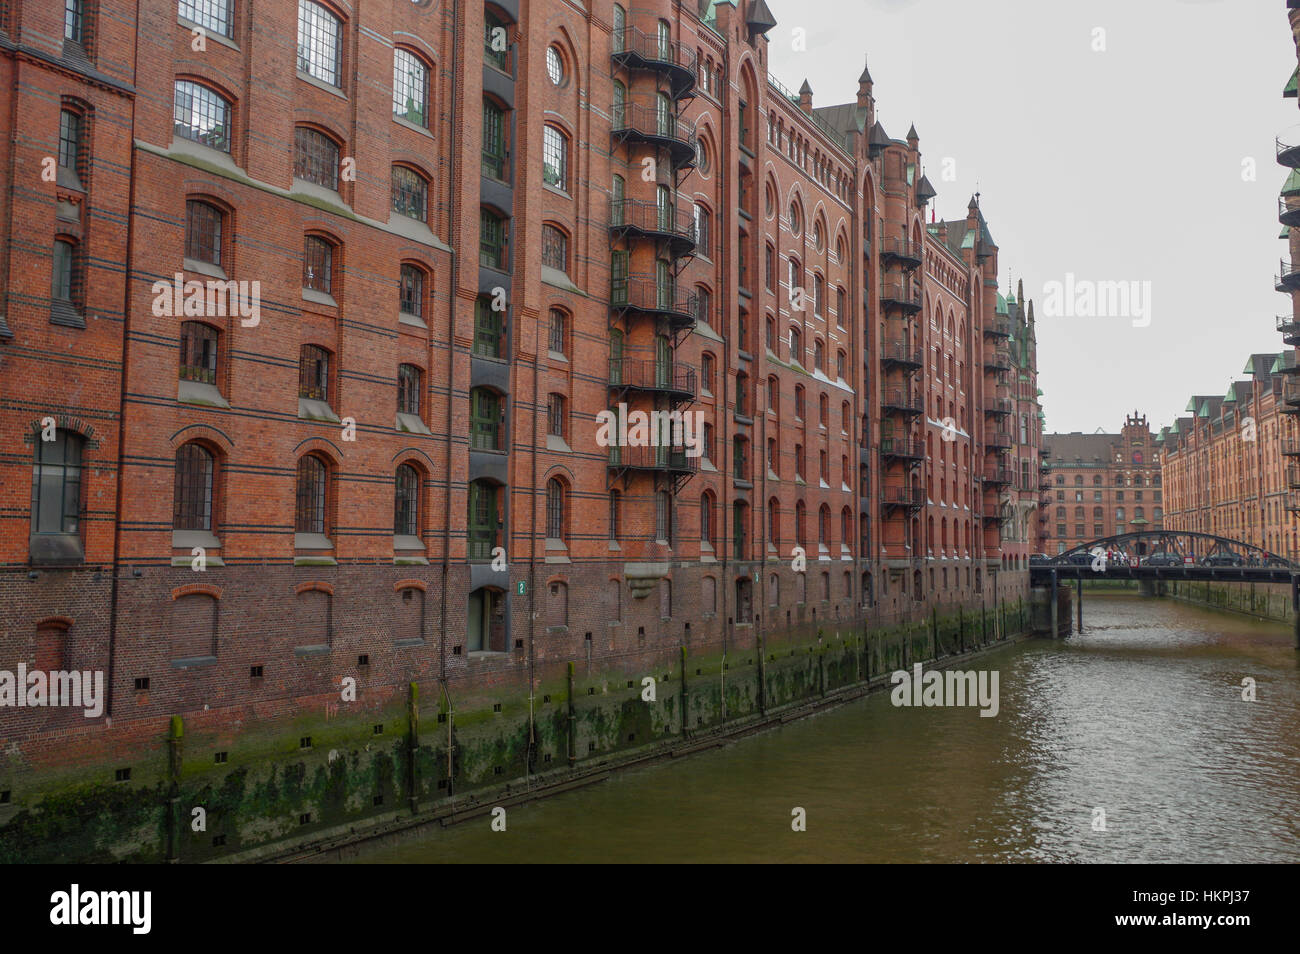 HAMBURG, GERMANY - JULY 18, 2015: canal of Historic Speicherstadt houses and bridges at evening with amaising skyview over warehouses, famous place on Stock Photo